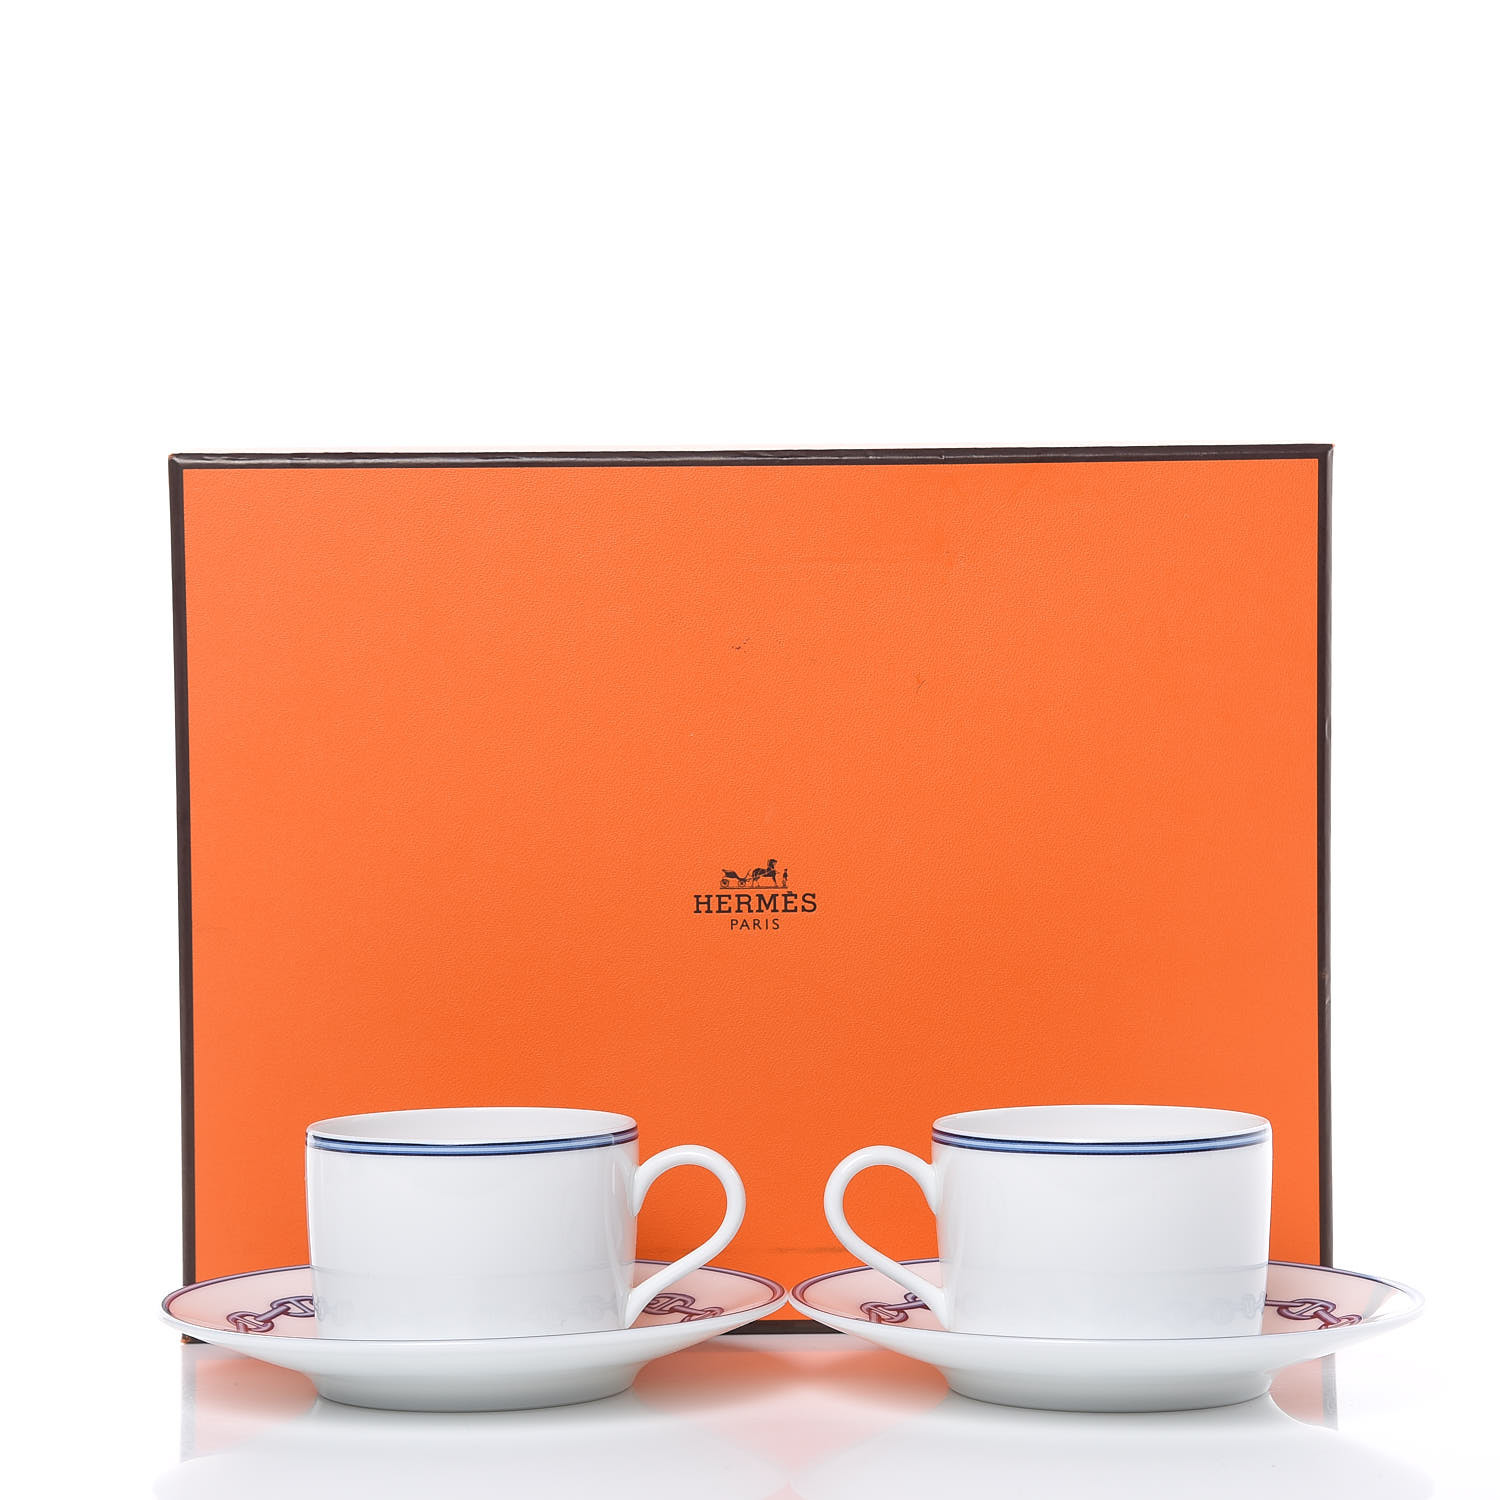 Hermes Porcelain Chaine Dancre Tea Cup And Saucer Set Of 2 430022 8269